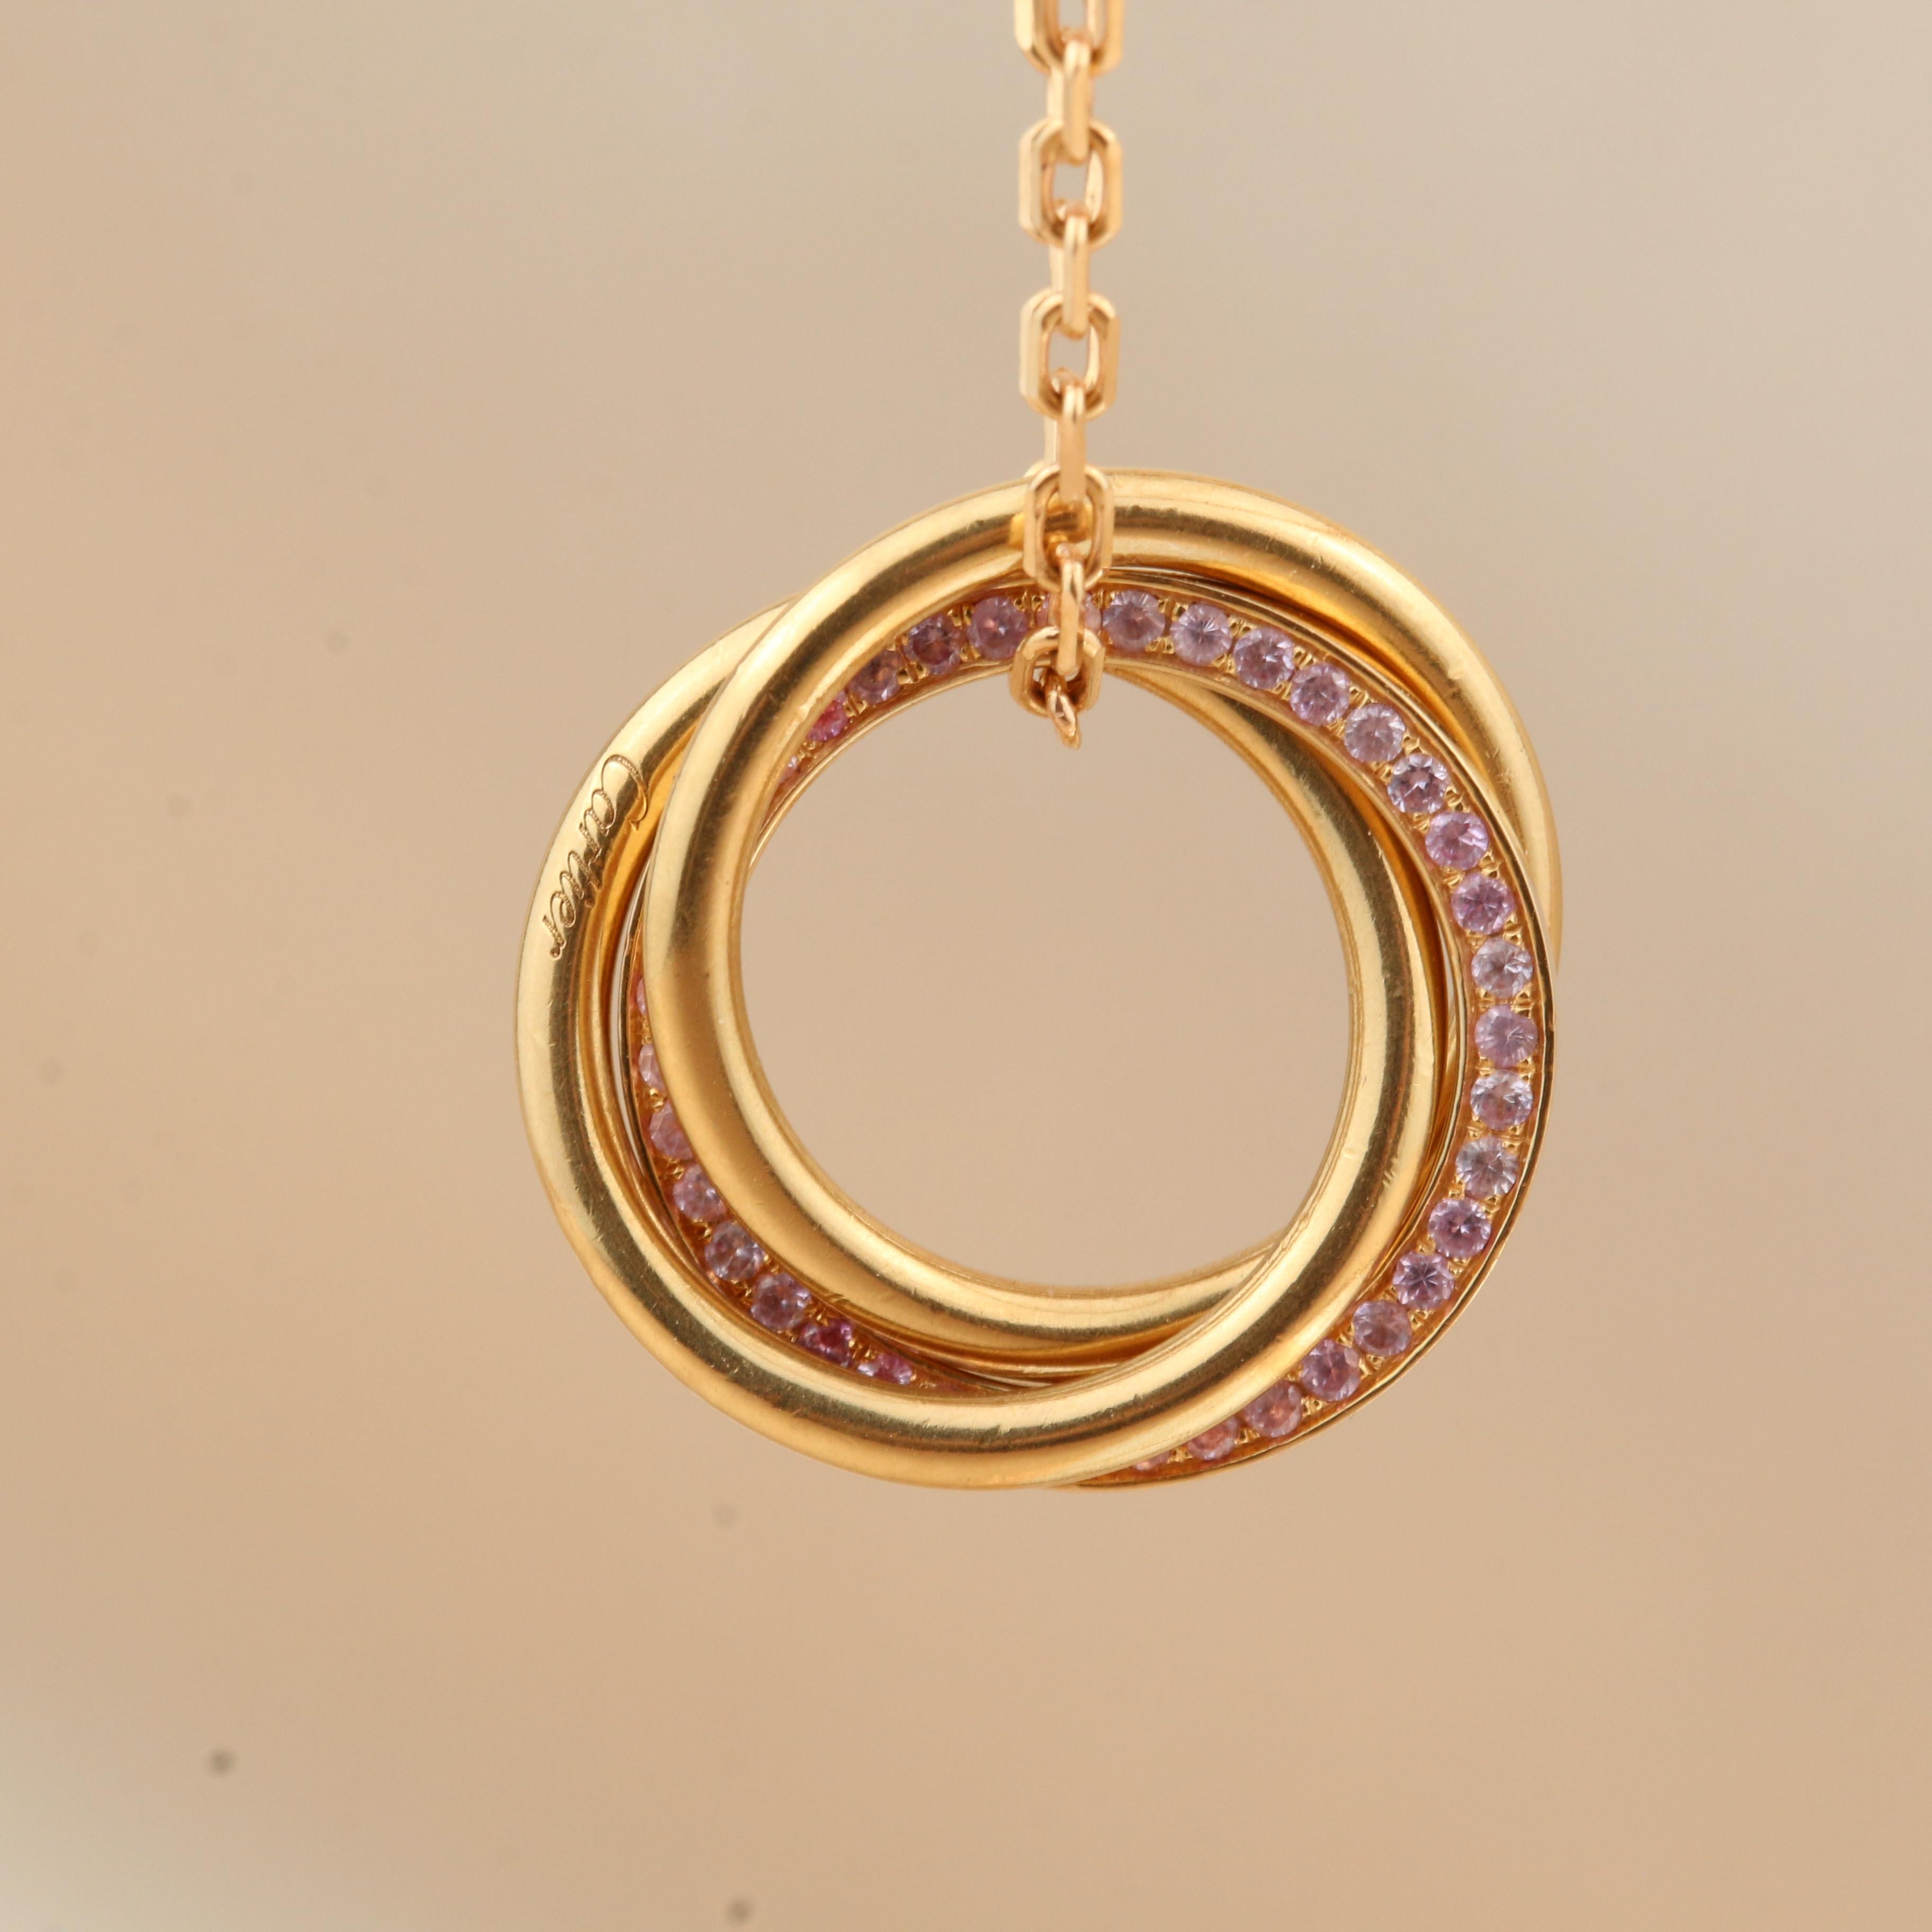 Brilliant Cut Cartier White, Yellow, Rose Gold and Pink Sapphire Trinity Pendant Necklace